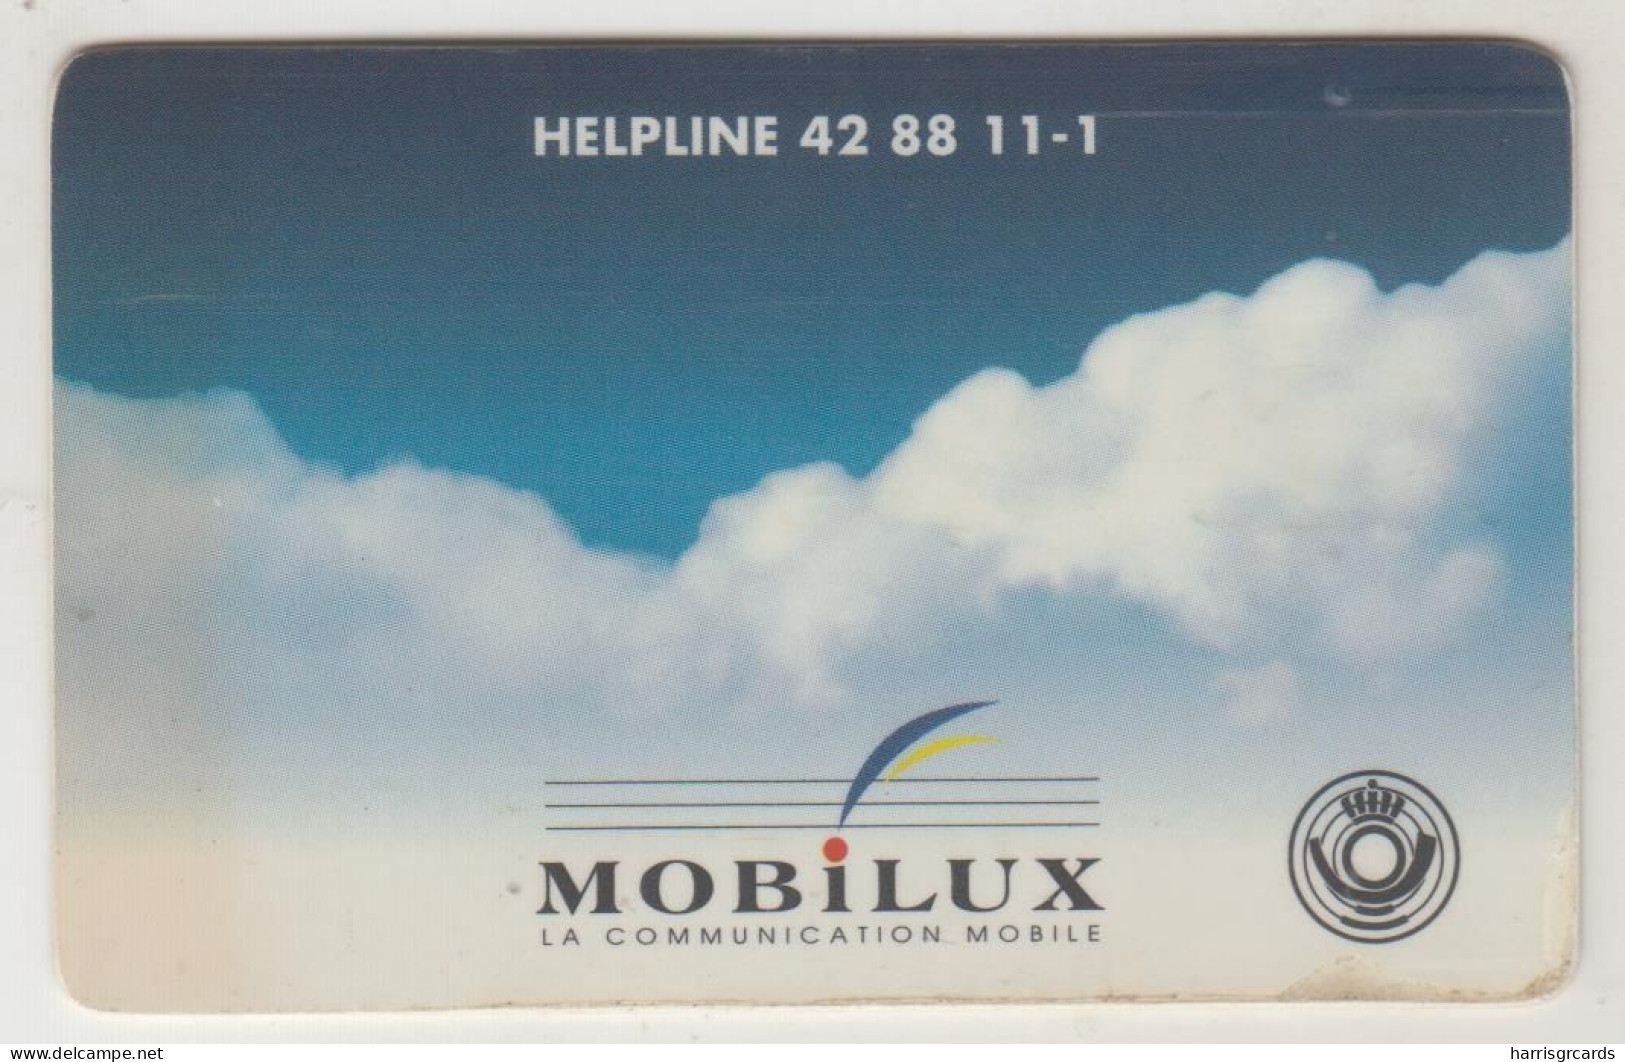 LUXEMBOURG - LUX GSM - Reverse "Mobilux Helpline 42 88 1-1" GSM Card, Used - Luxembourg